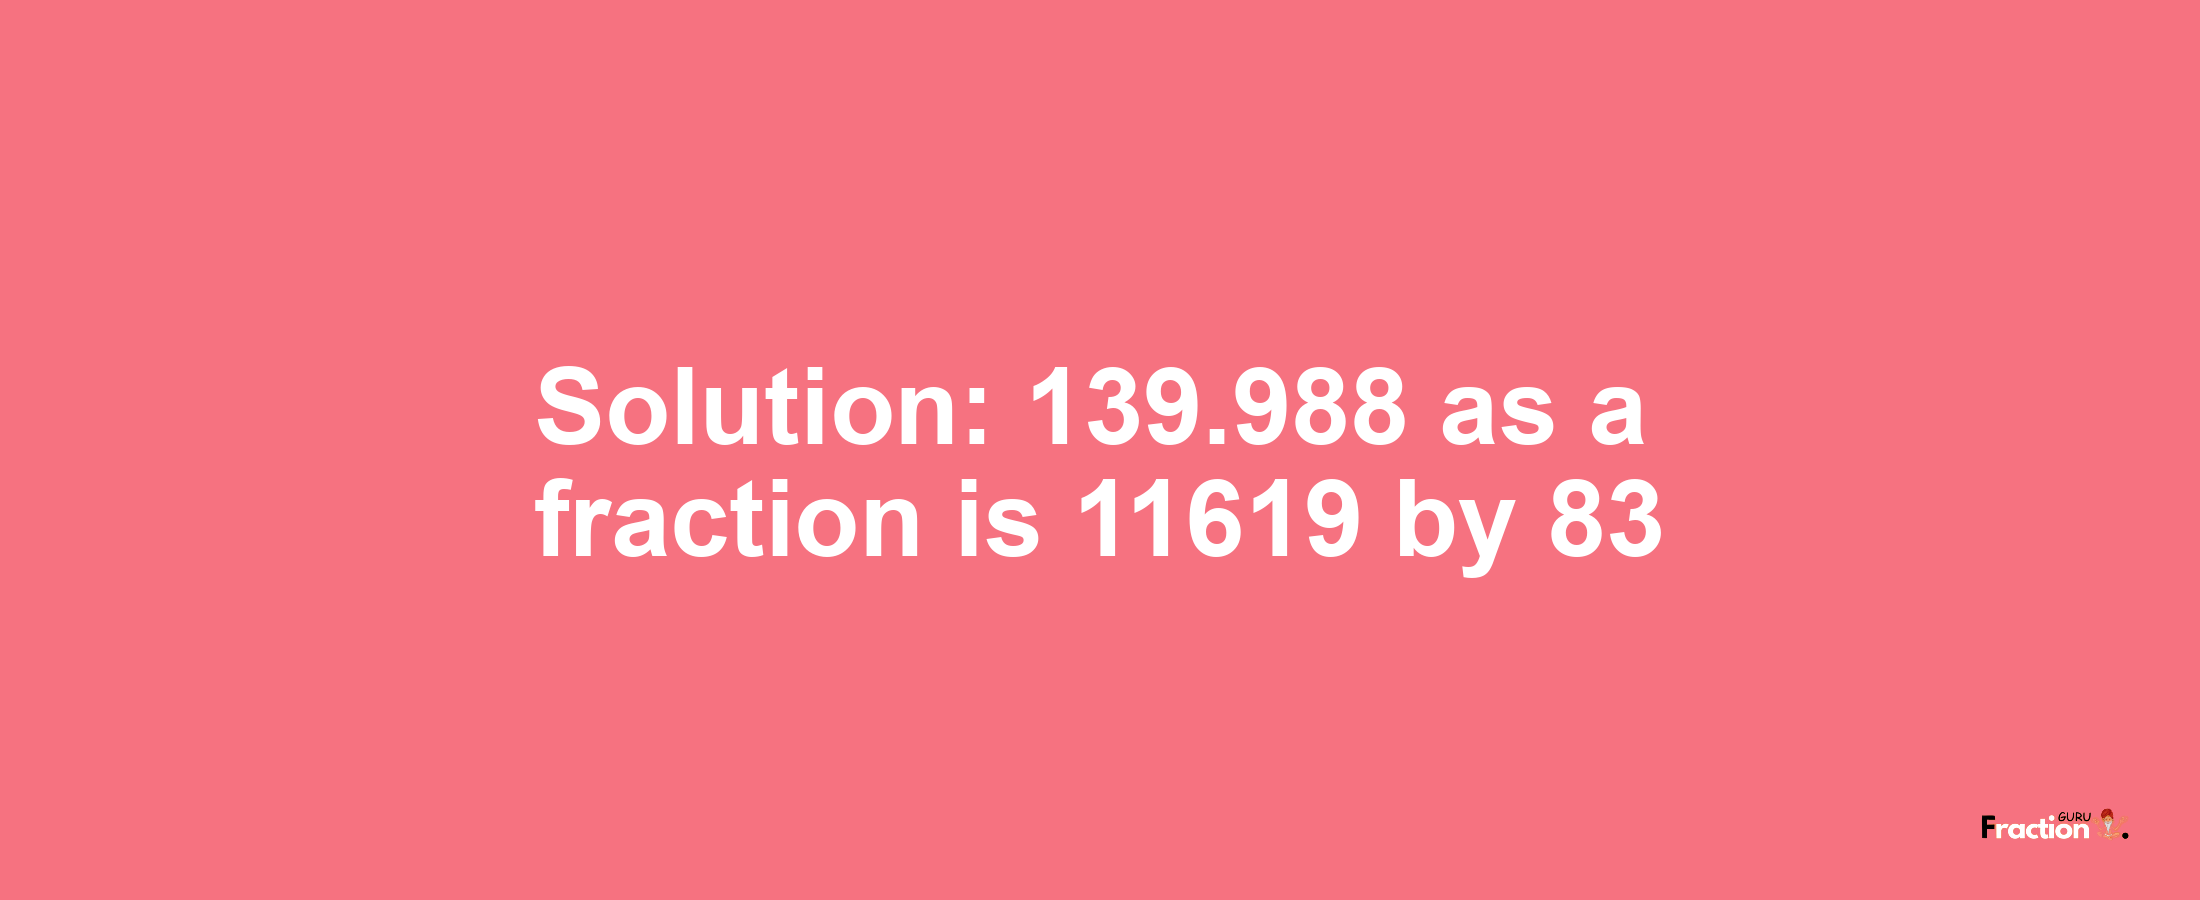 Solution:139.988 as a fraction is 11619/83